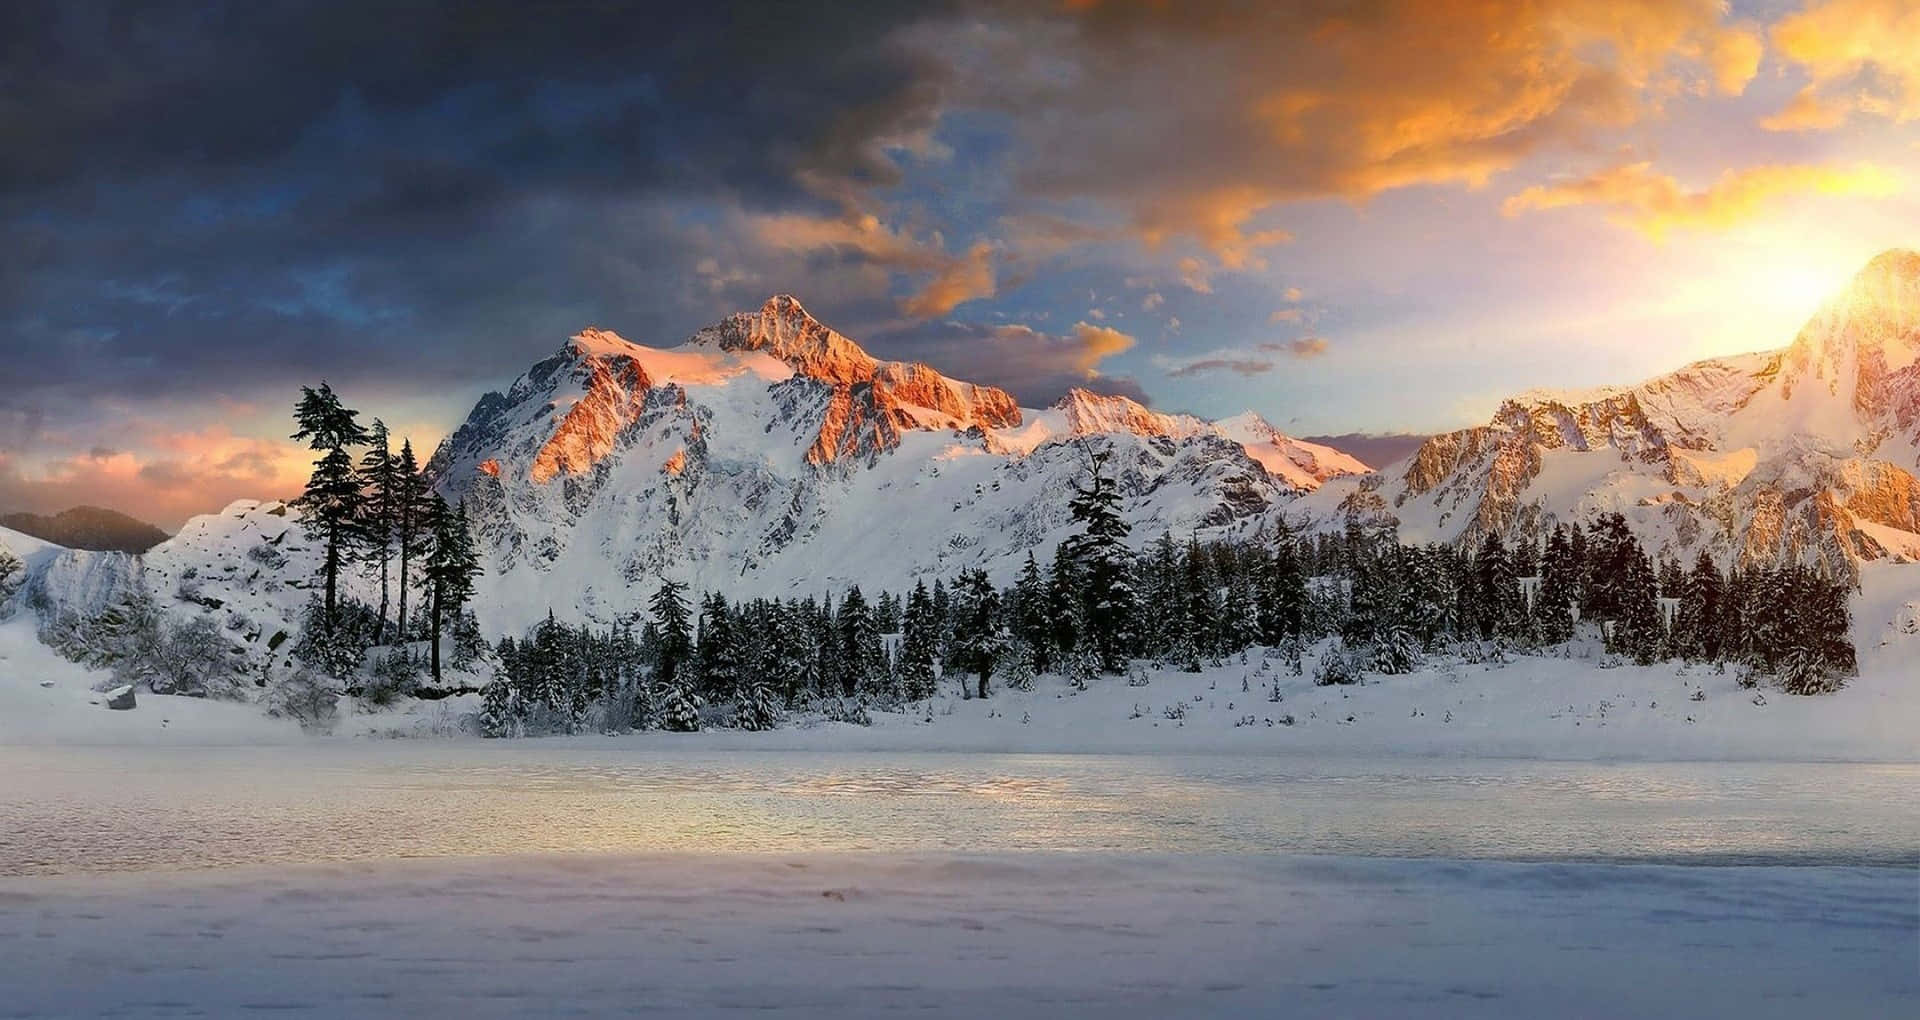 Take a breathtaking journey and witness the beauty of the snow-capped mountains